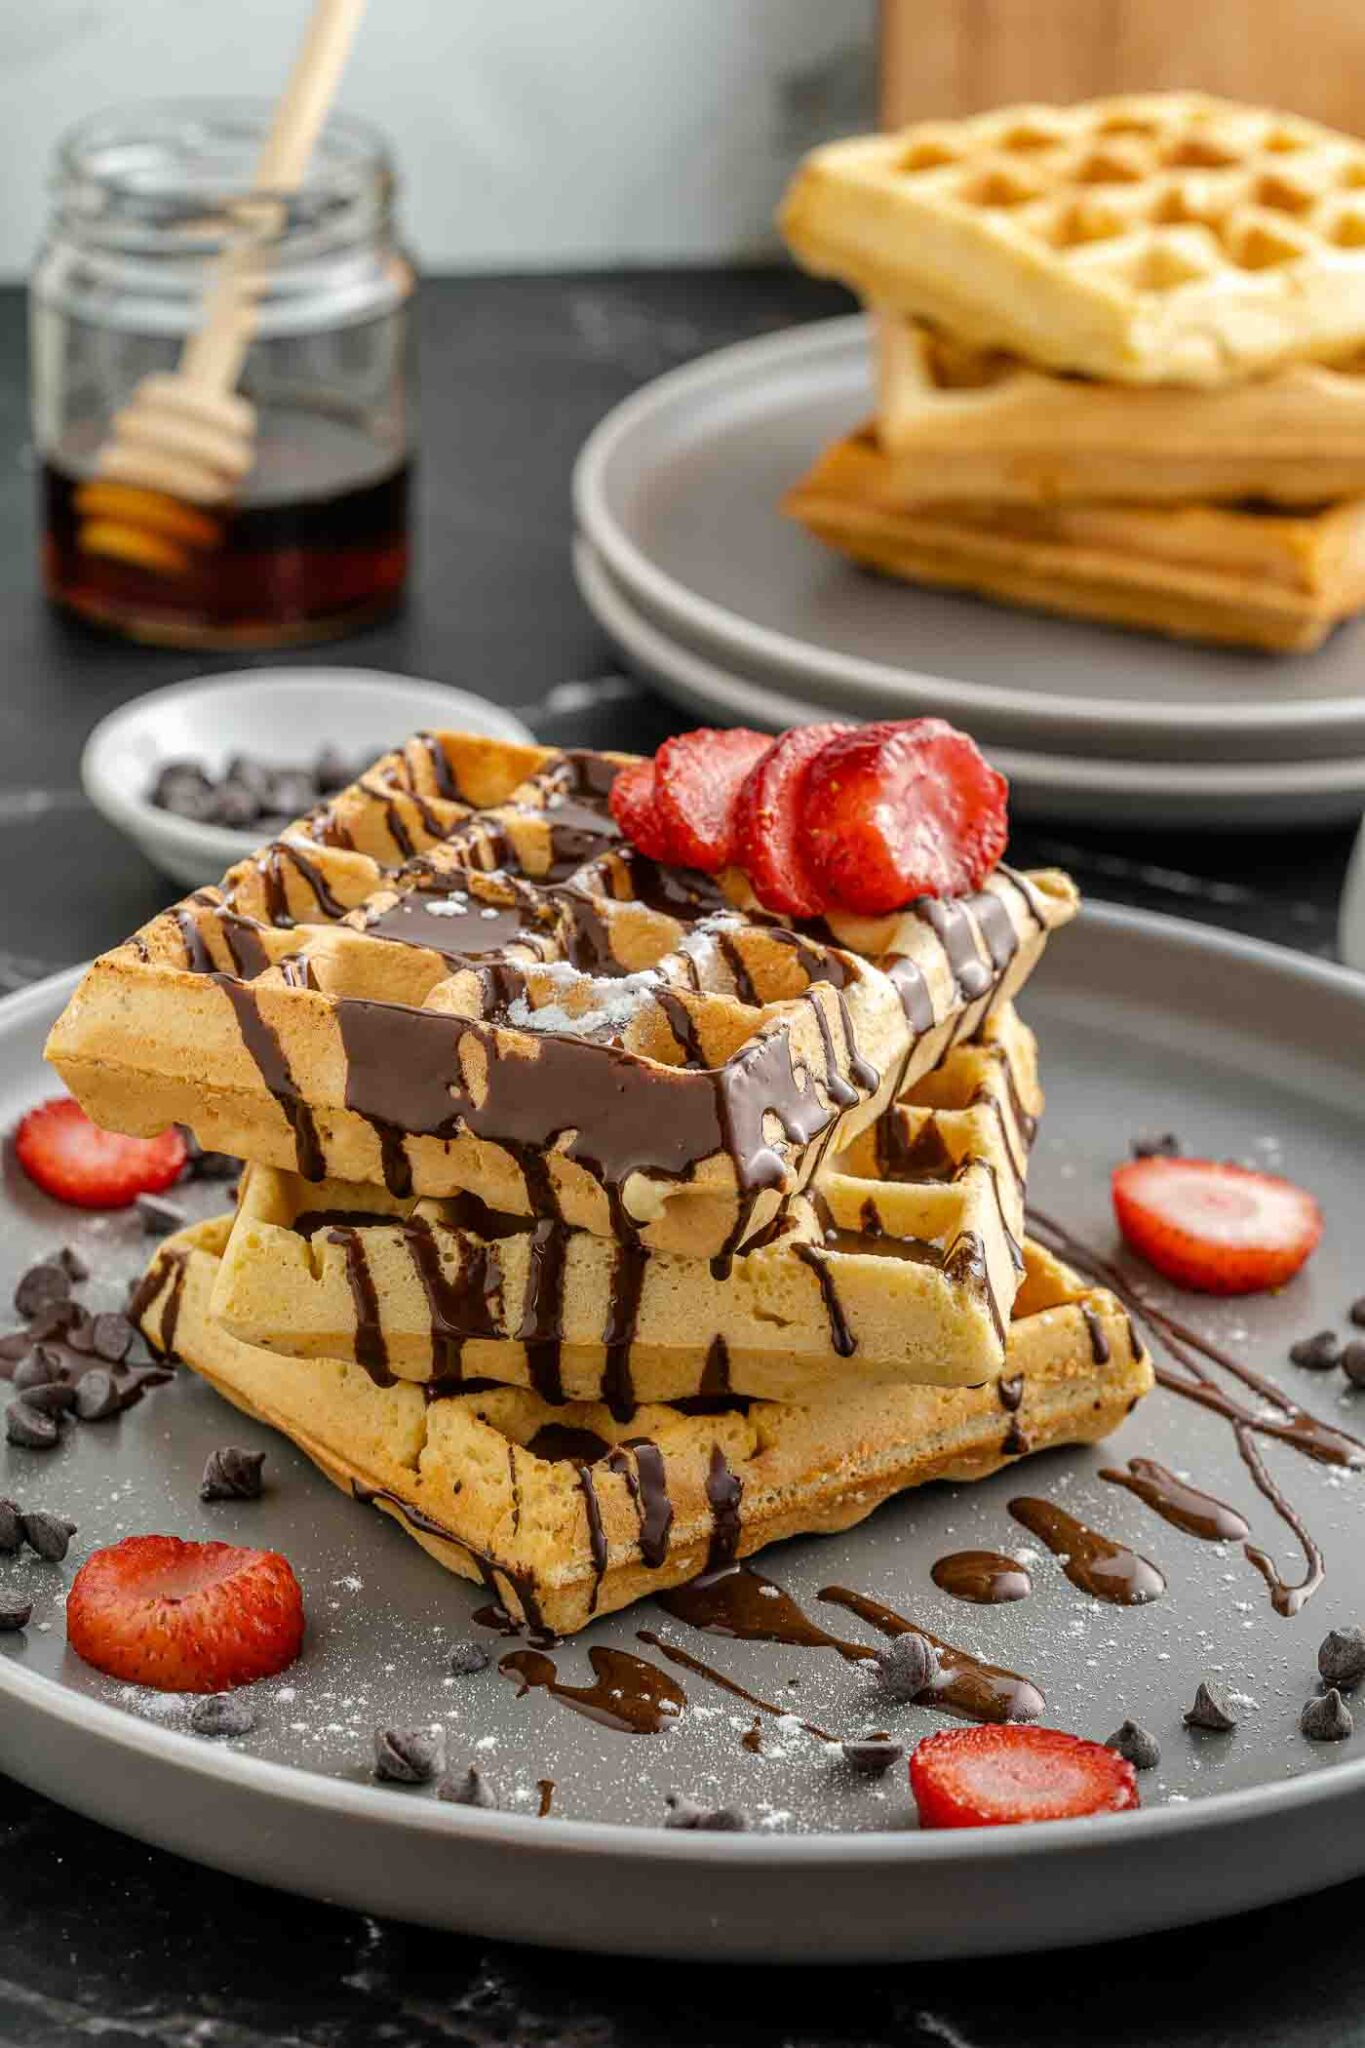 three waffles on a gray plate with chocolate drizzle and strawberry